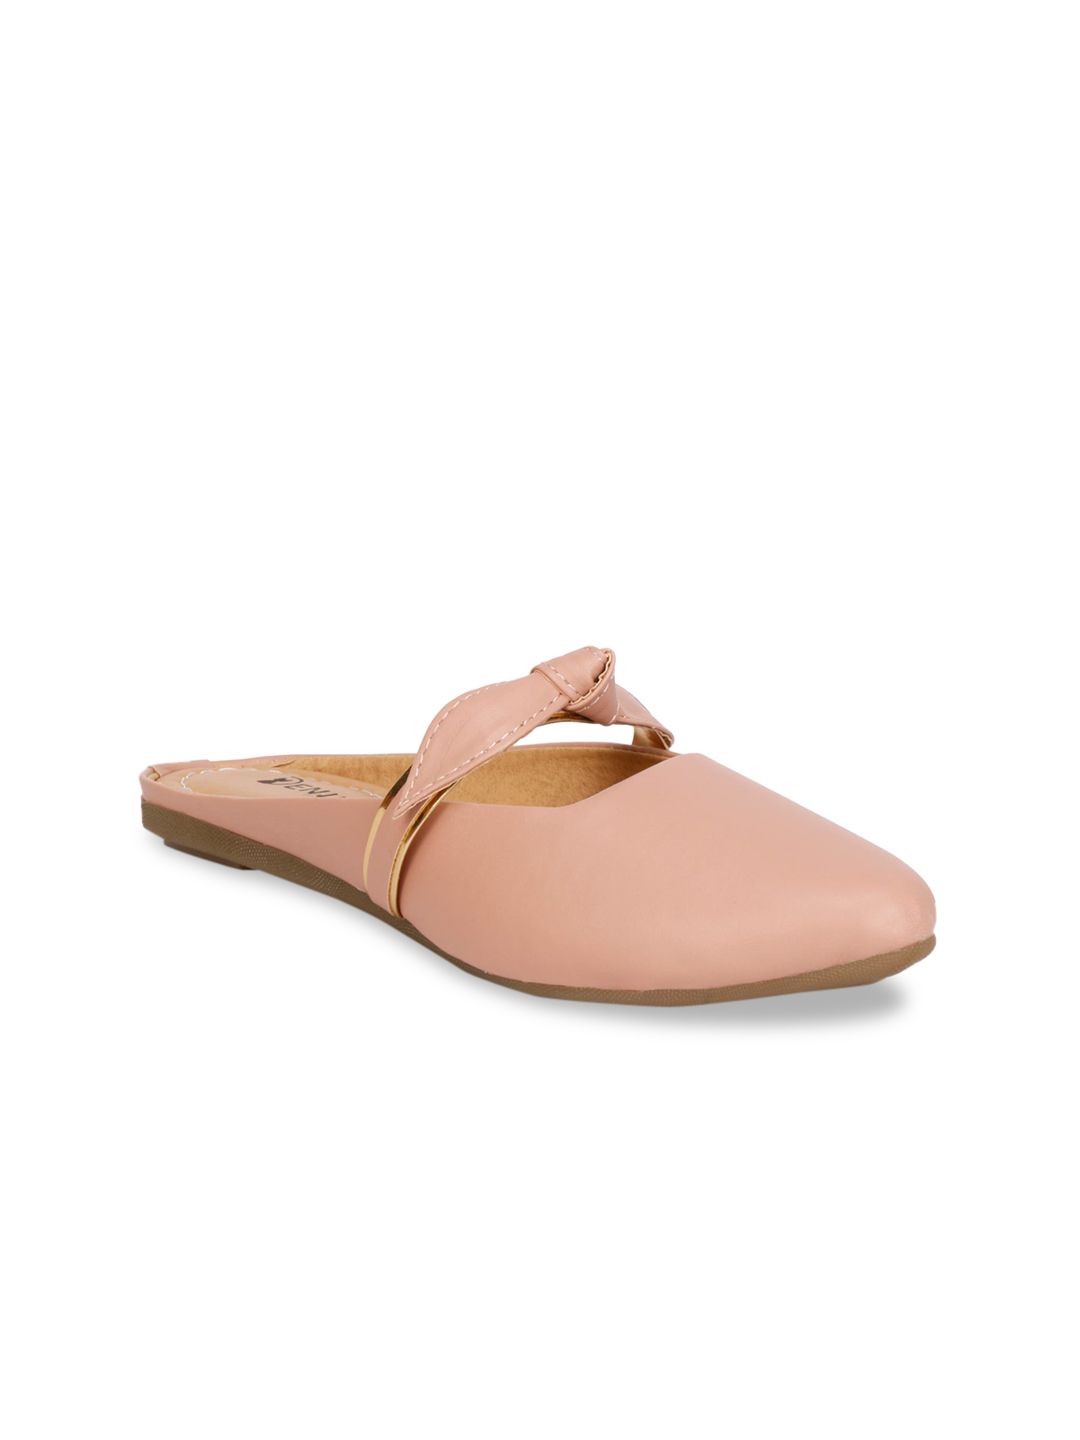 Denill Women Peach-Coloured Mules with Bows Flats Price in India